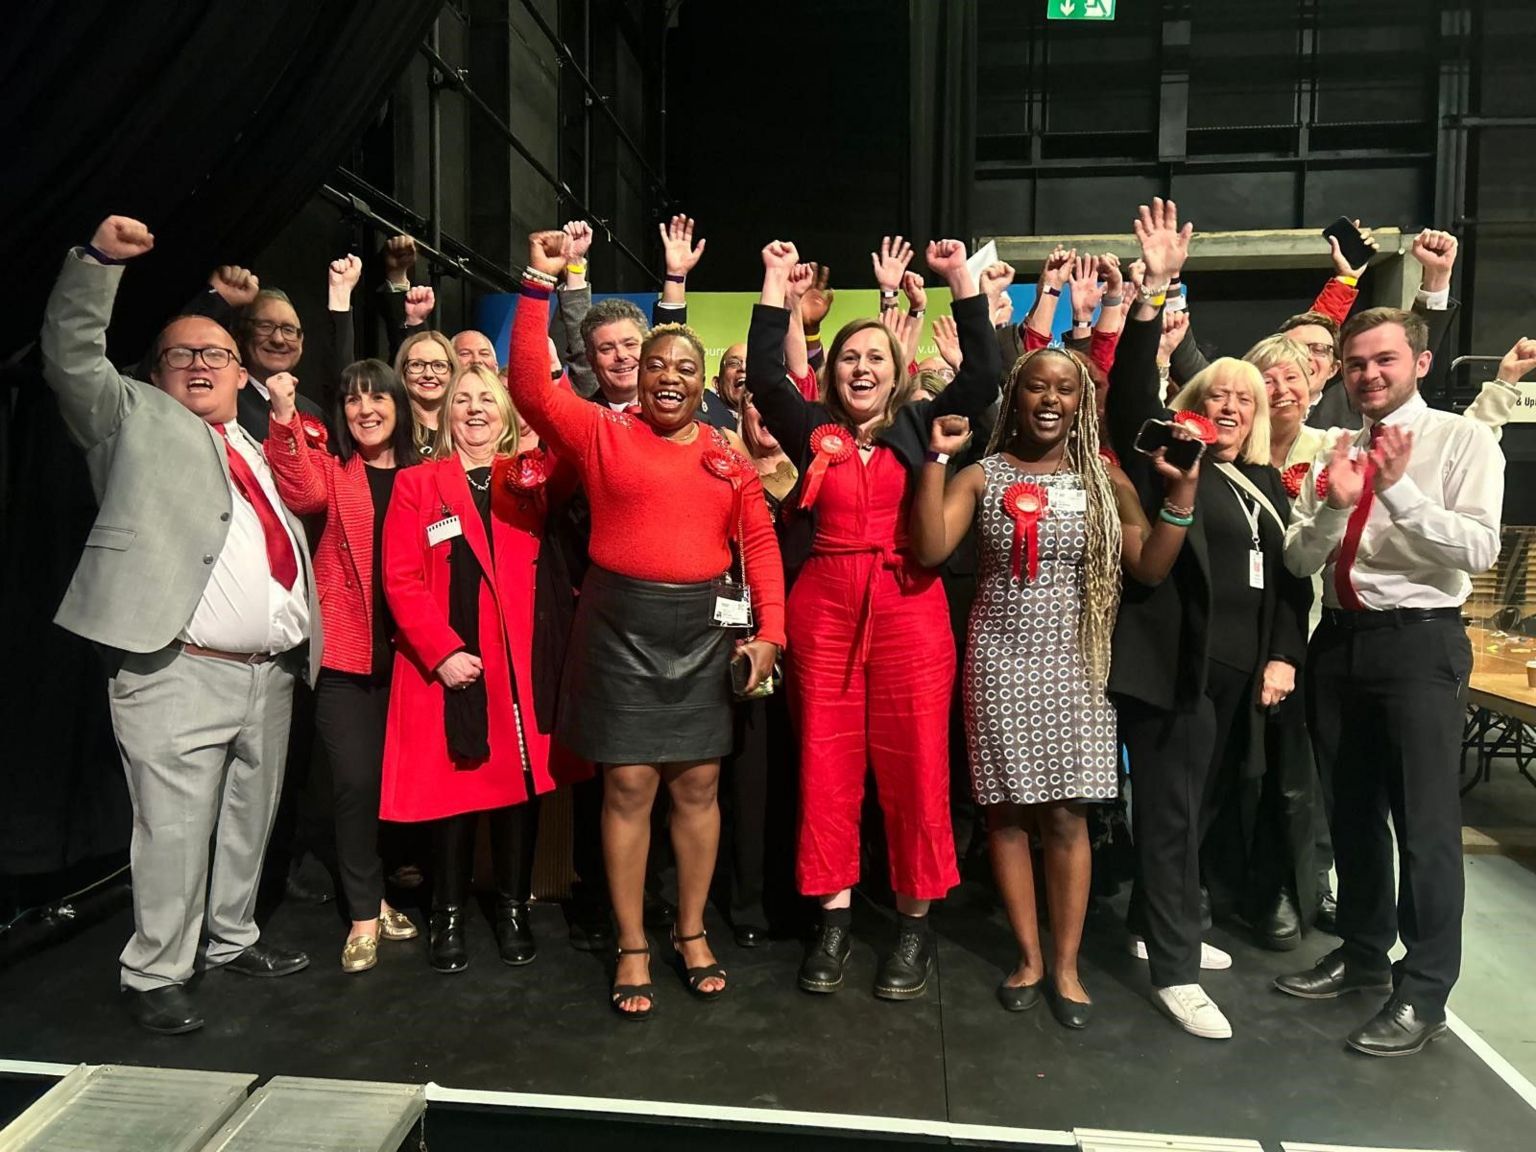 A group of Labour councillors celebrating on a stage